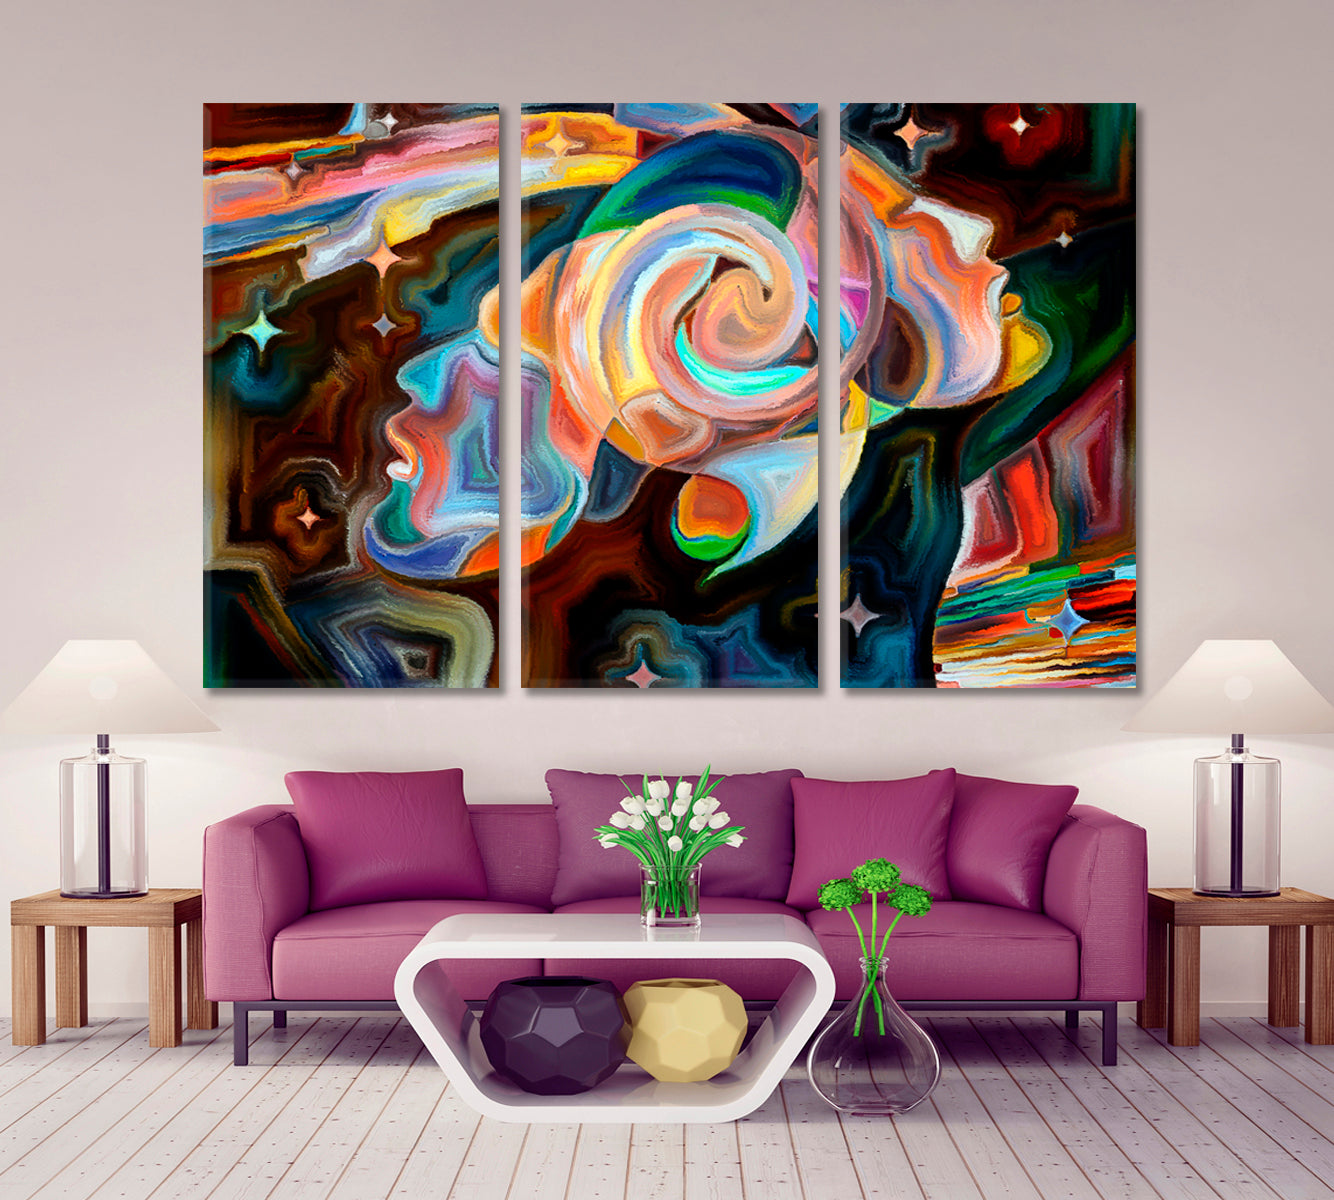 Two Sides Abstraction Consciousness Art Artesty 3 panels 36" x 24" 